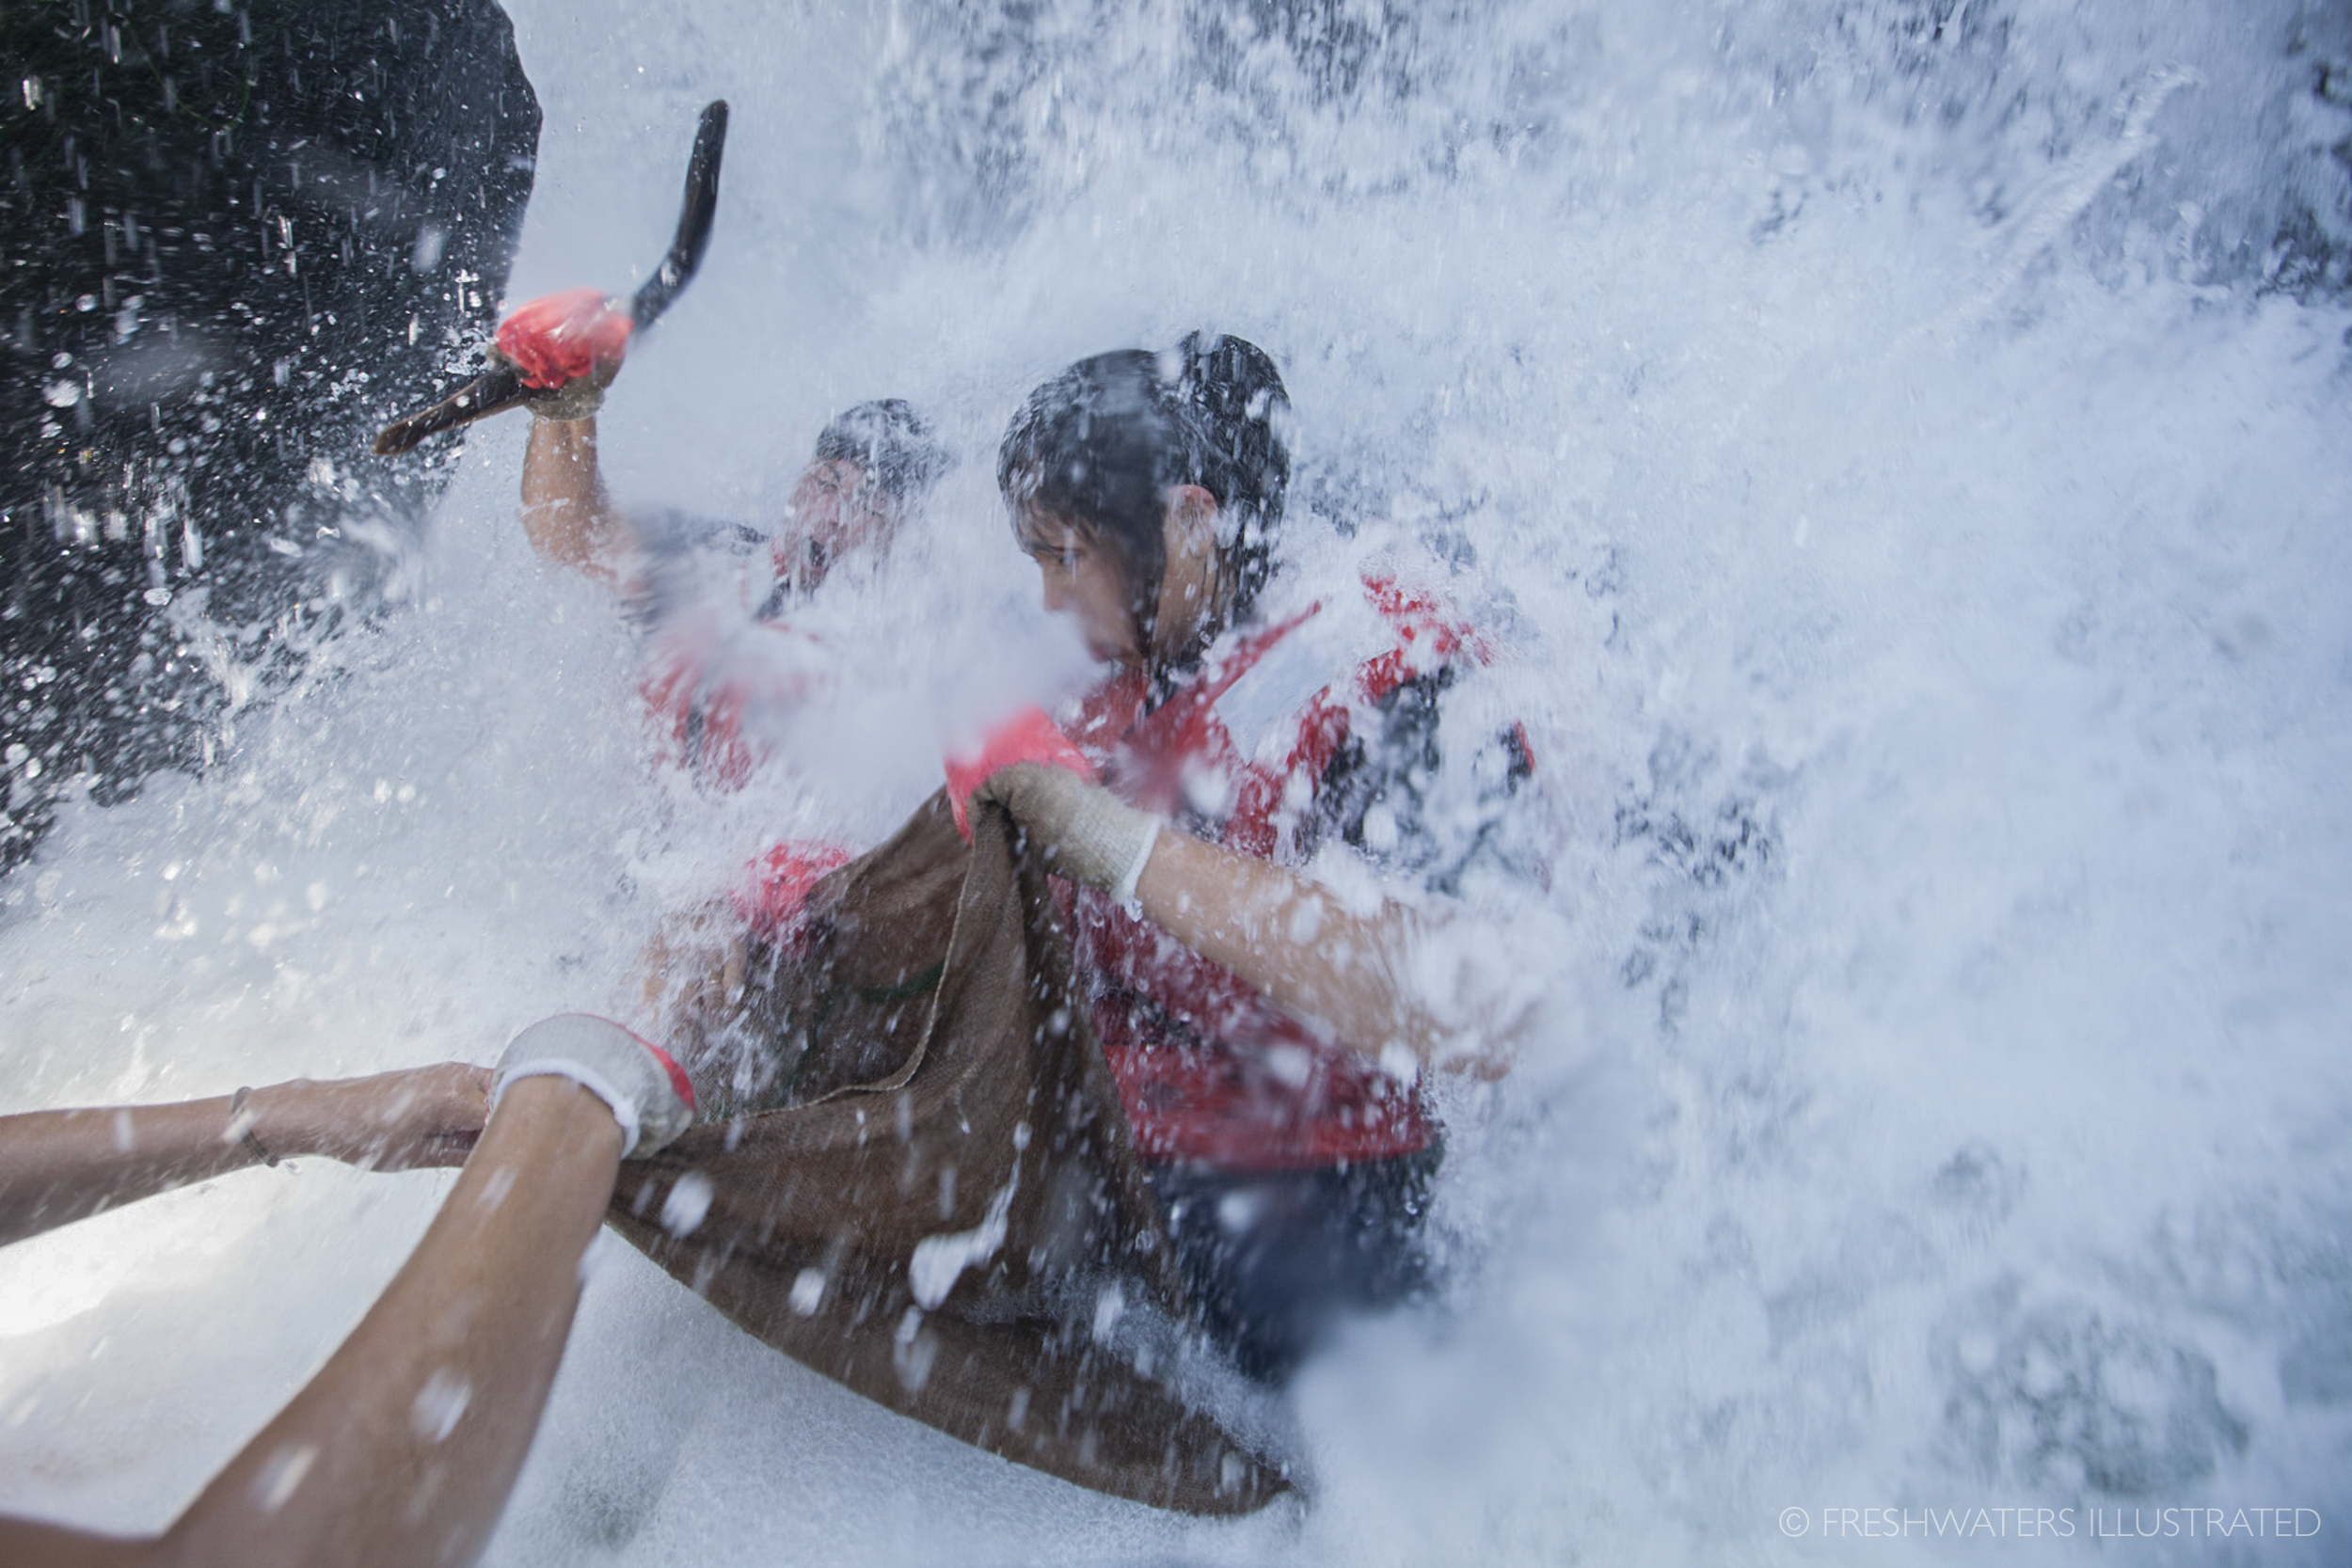  Warm Springs tribal members brave the pounding waters of Oregon's Willamette Falls to harvest Pacific lamprey. The Willamette is one of the last places left in the Columbia Basin that tribes can still catch sustainable numbers of this disappearing f